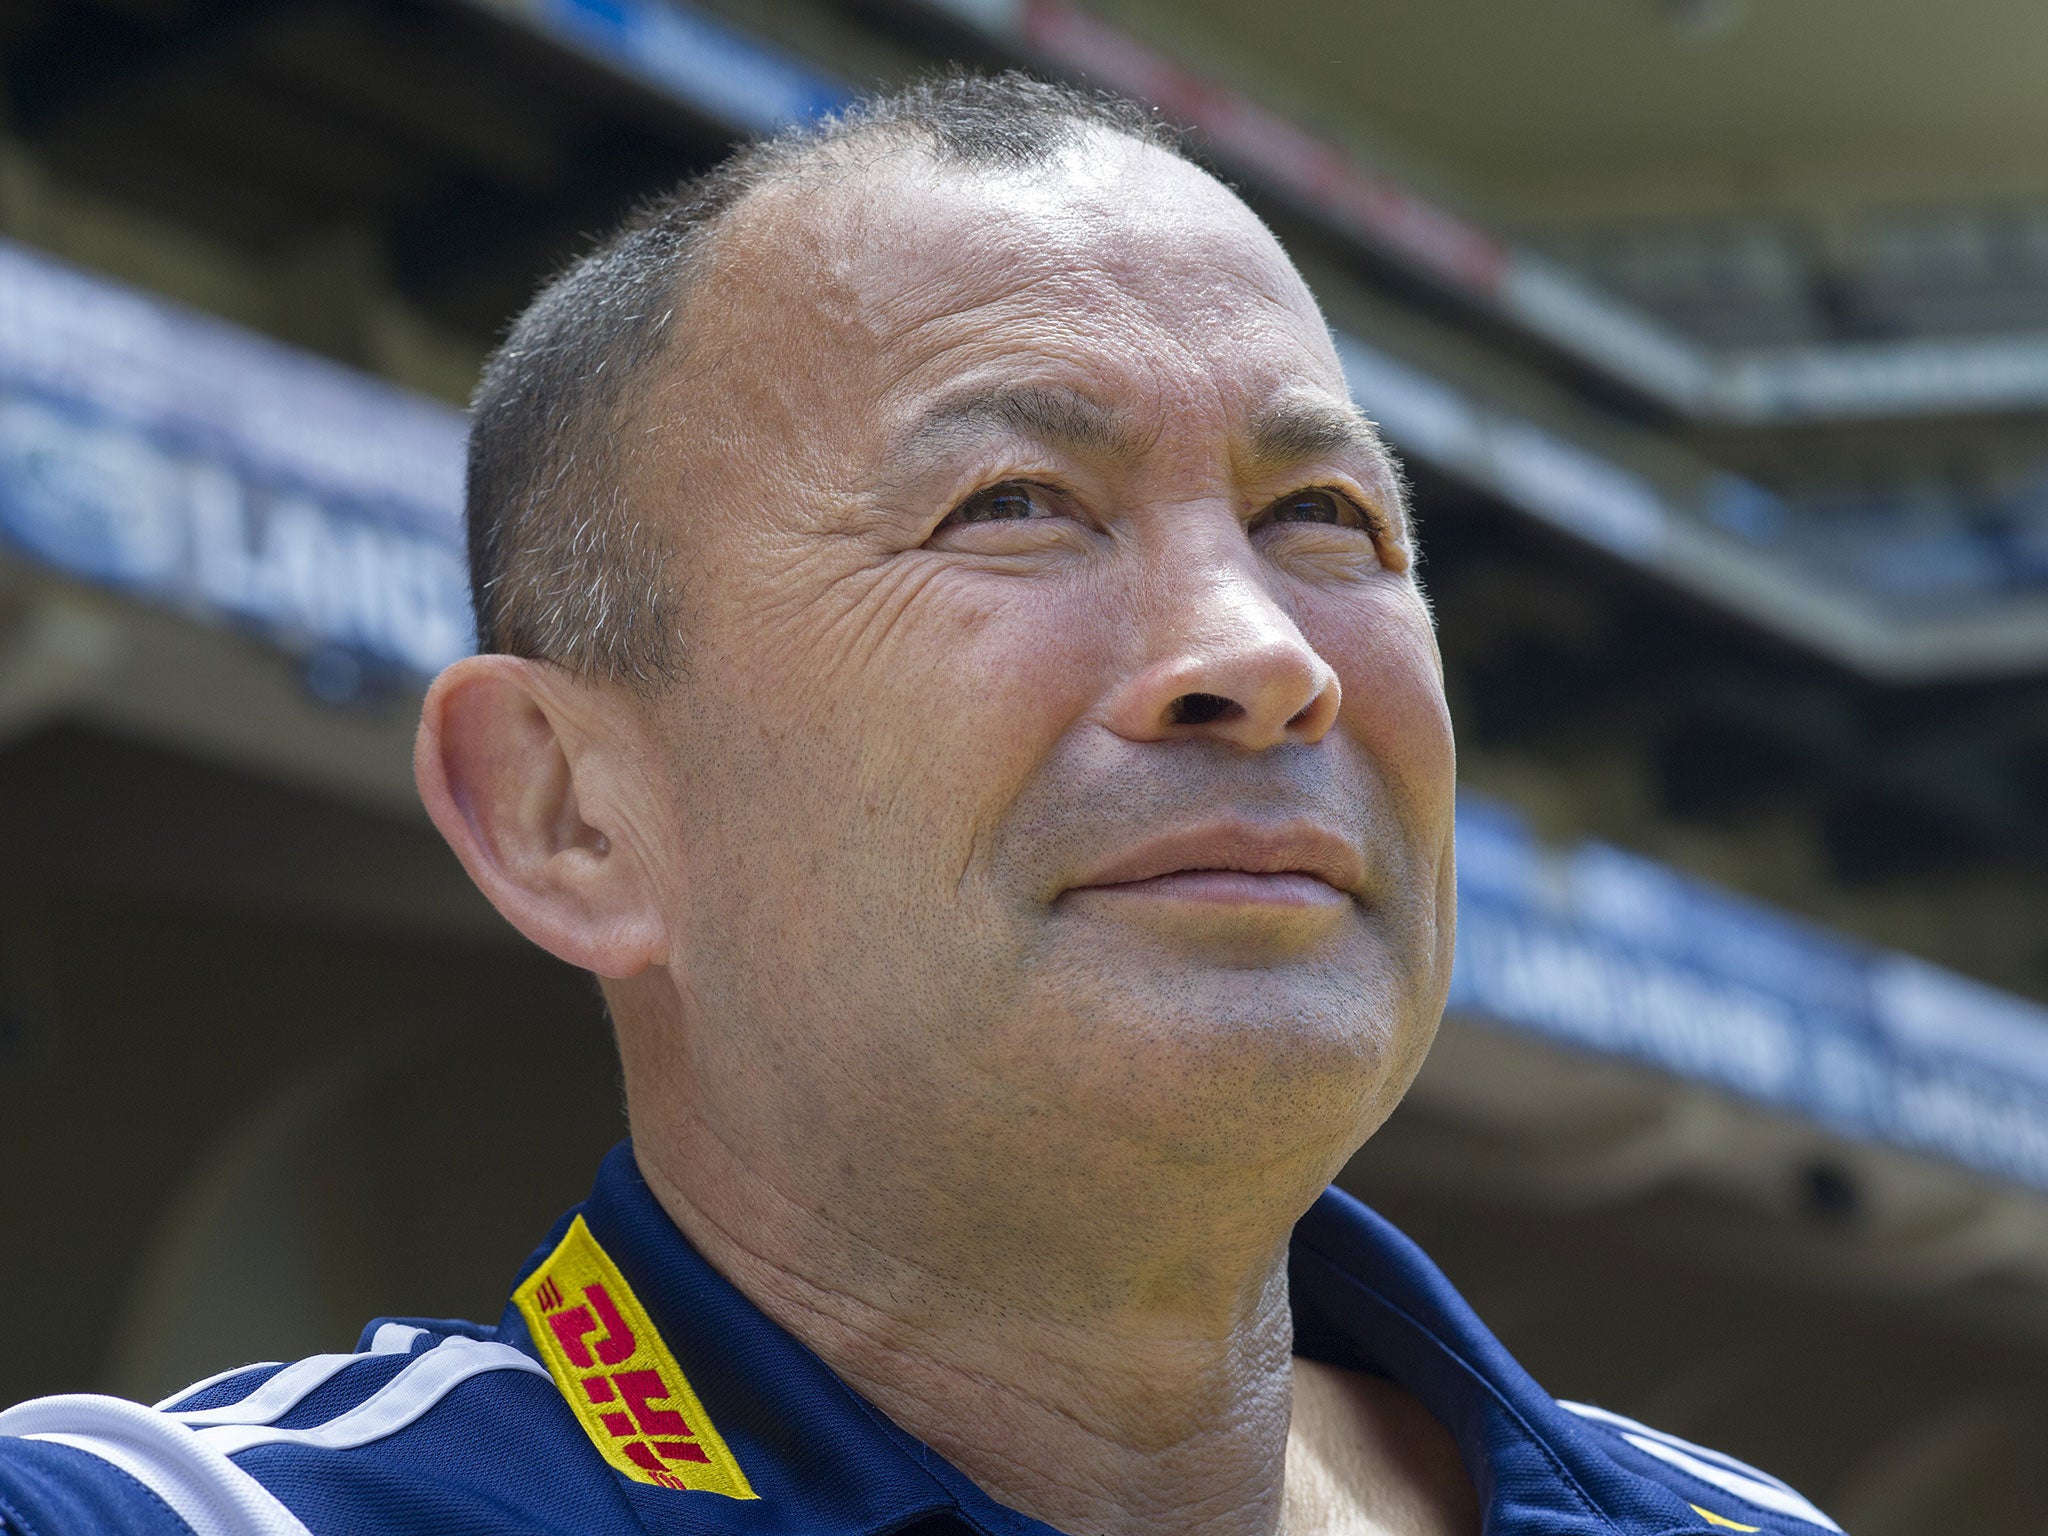 Eddie Jones is set to become the new England coach